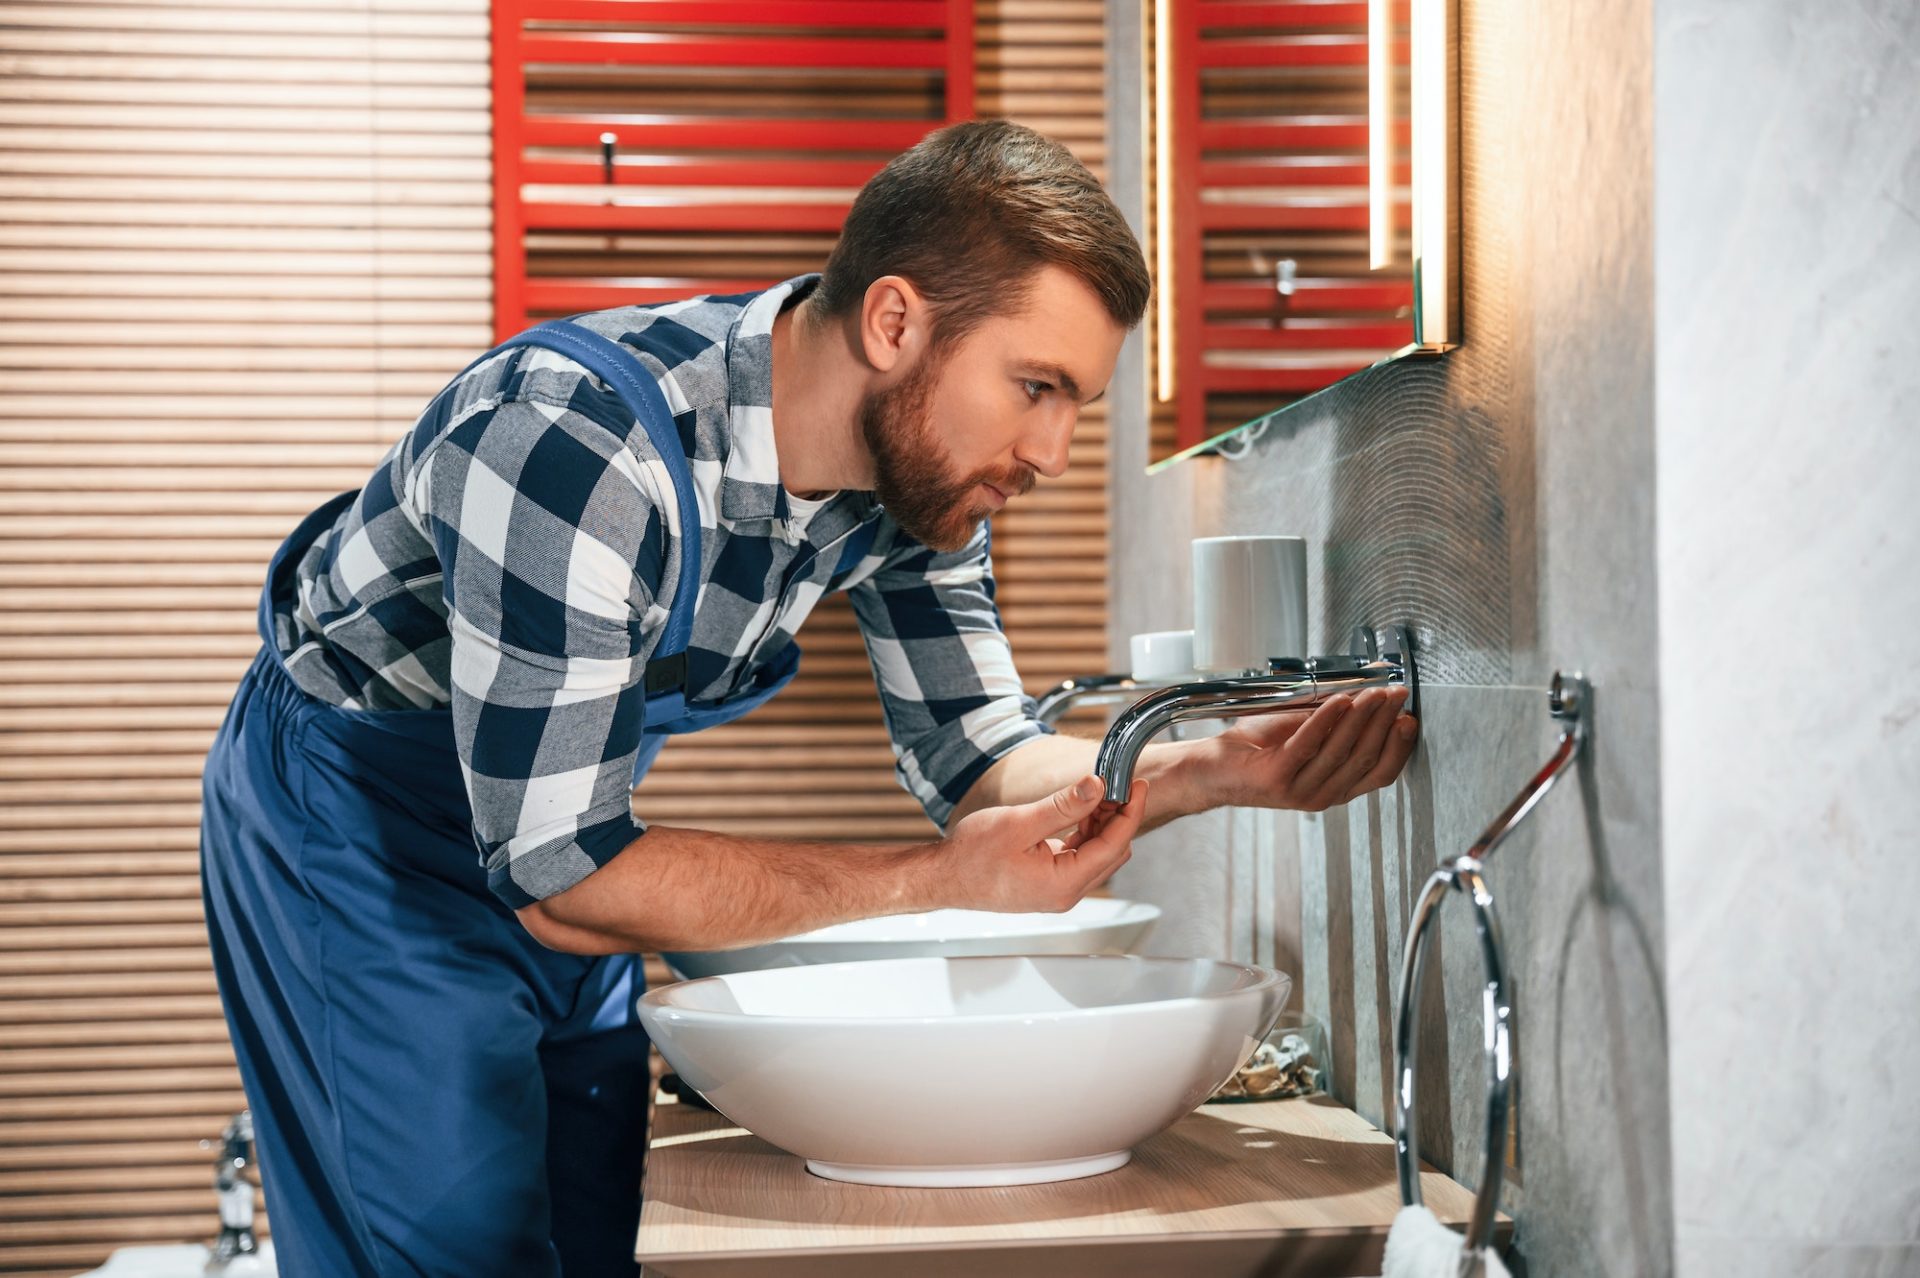 plumber-in-blue-uniform-is-at-work-in-the-bathroom-e1686029515618